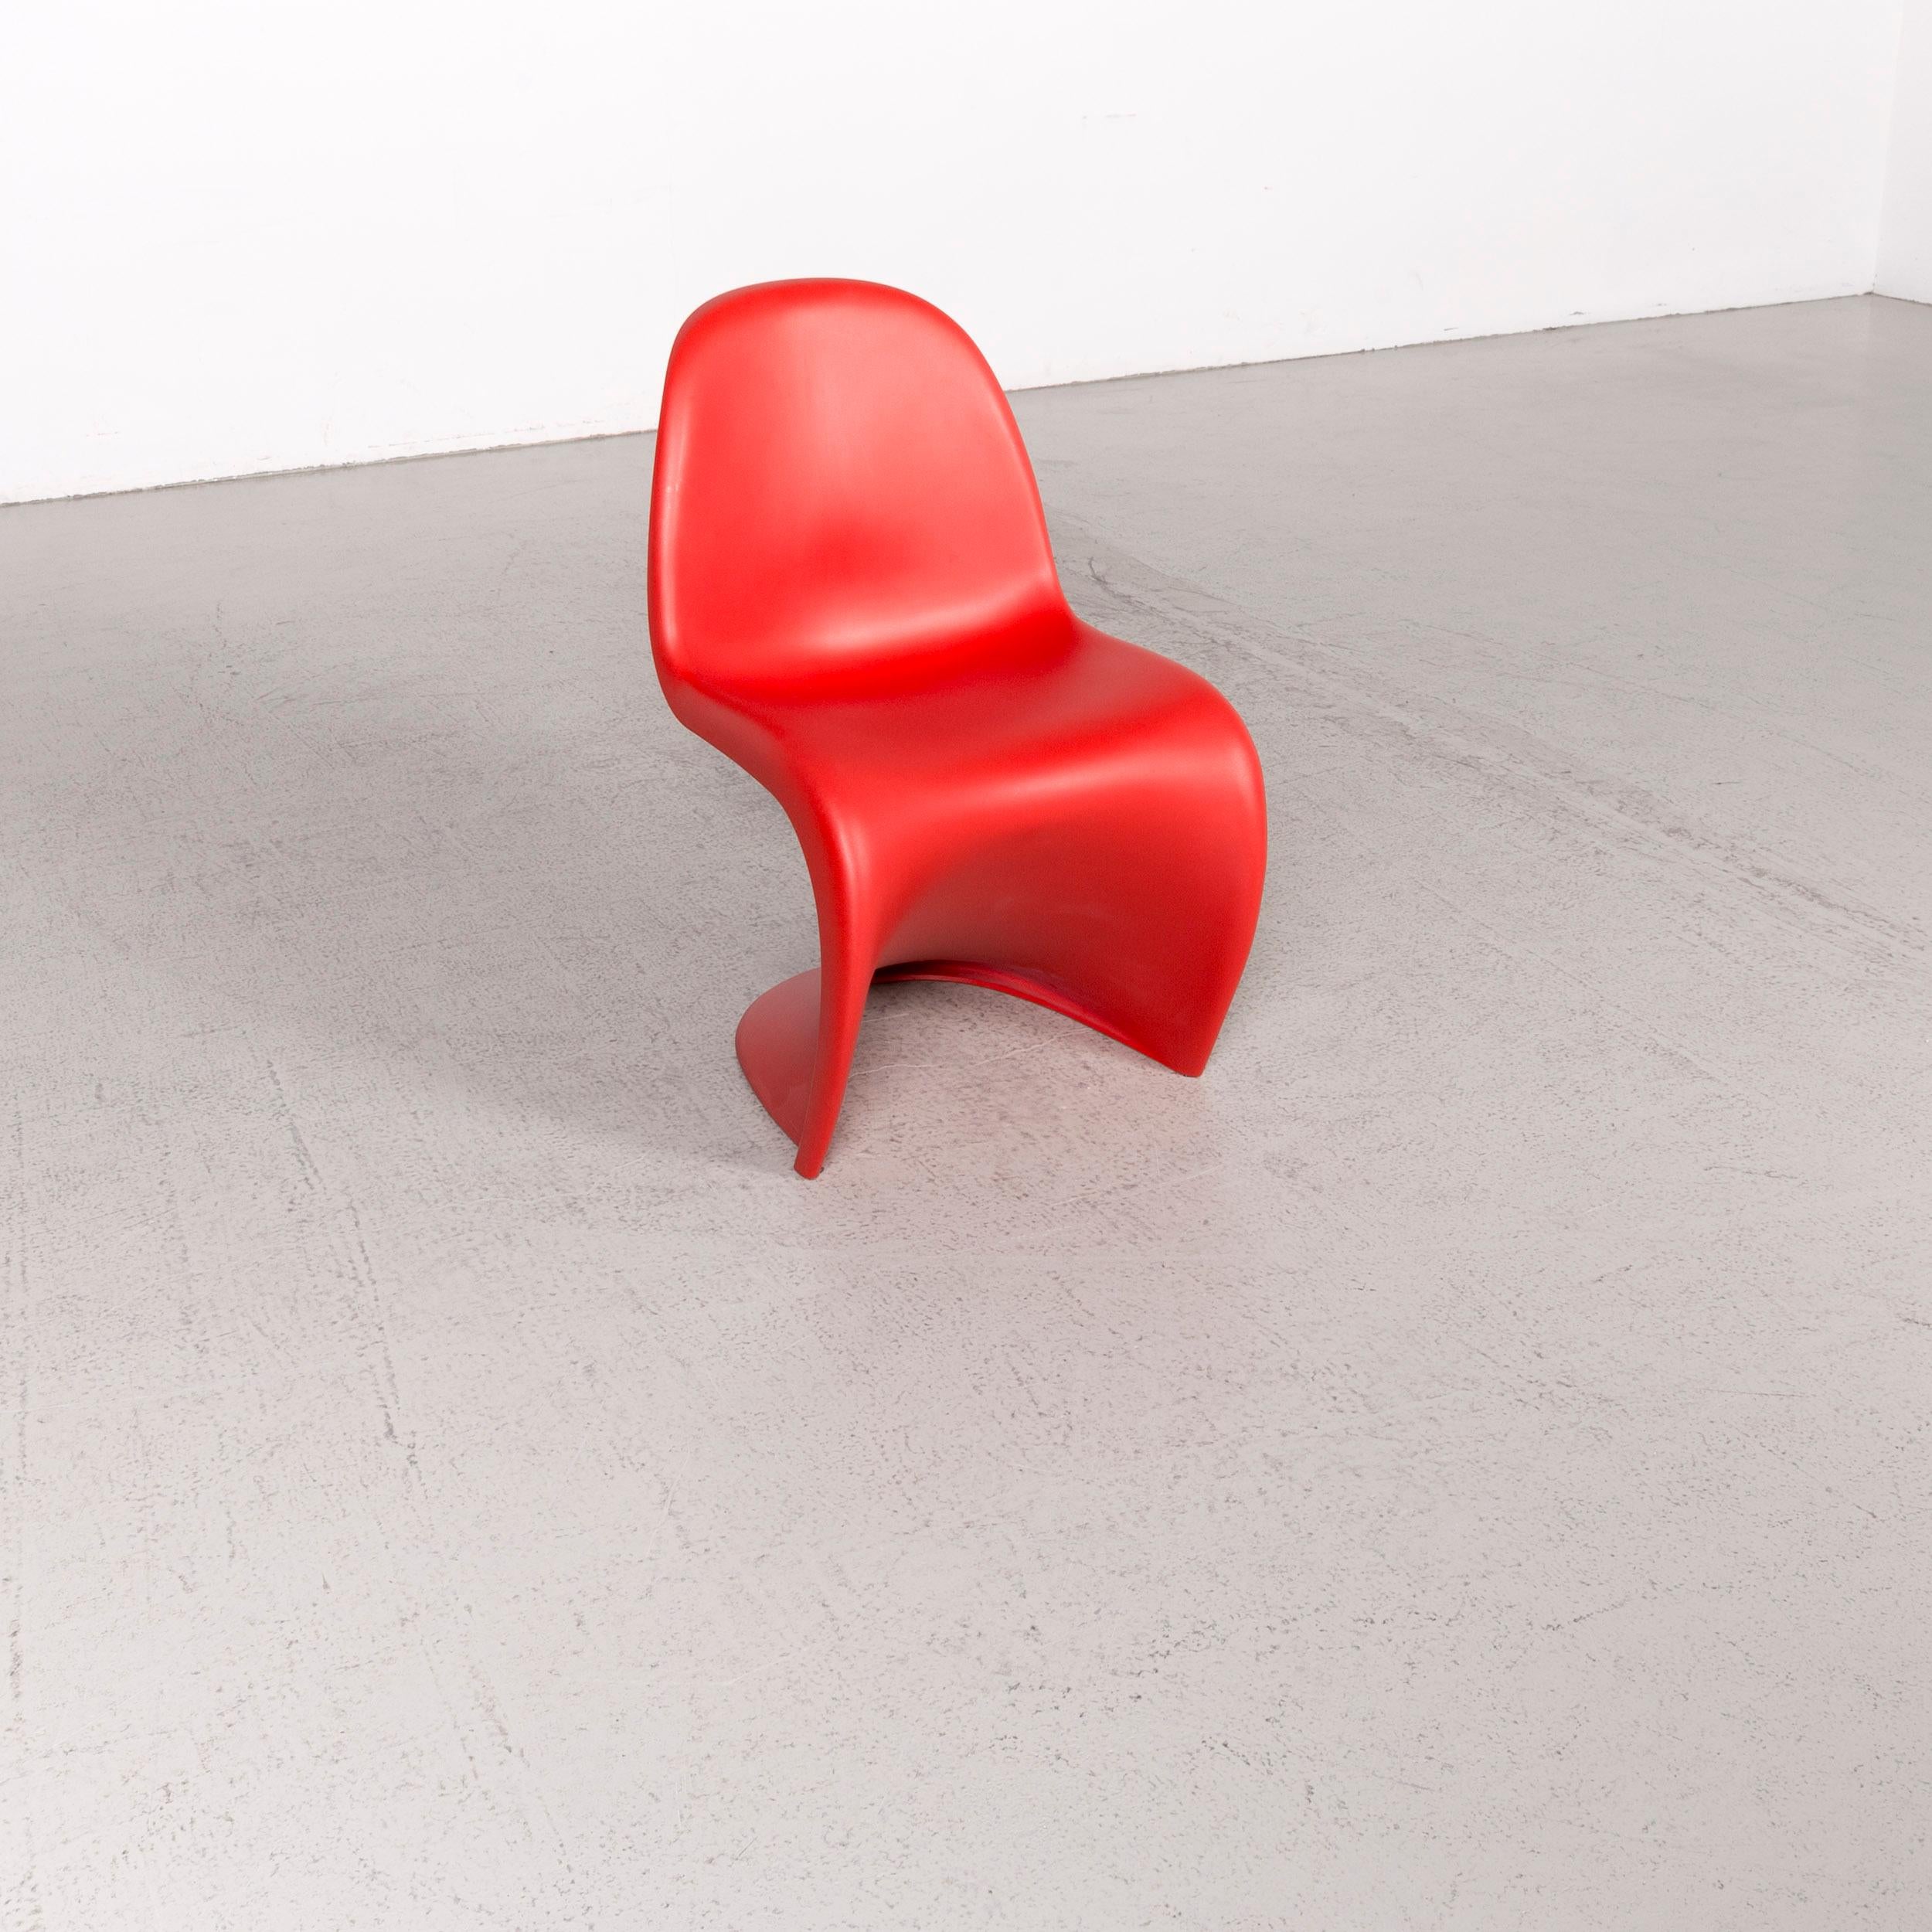 We bring to you a Vitra Panton chair designer plastic armchair red by Verner Panton Polyproypylen.

Product measurements in centimeters:

Depth 60
Width 50
Height 82
Seat-height 43 
Seat-depth 35
Seat-width 43
Back-height 45.


  